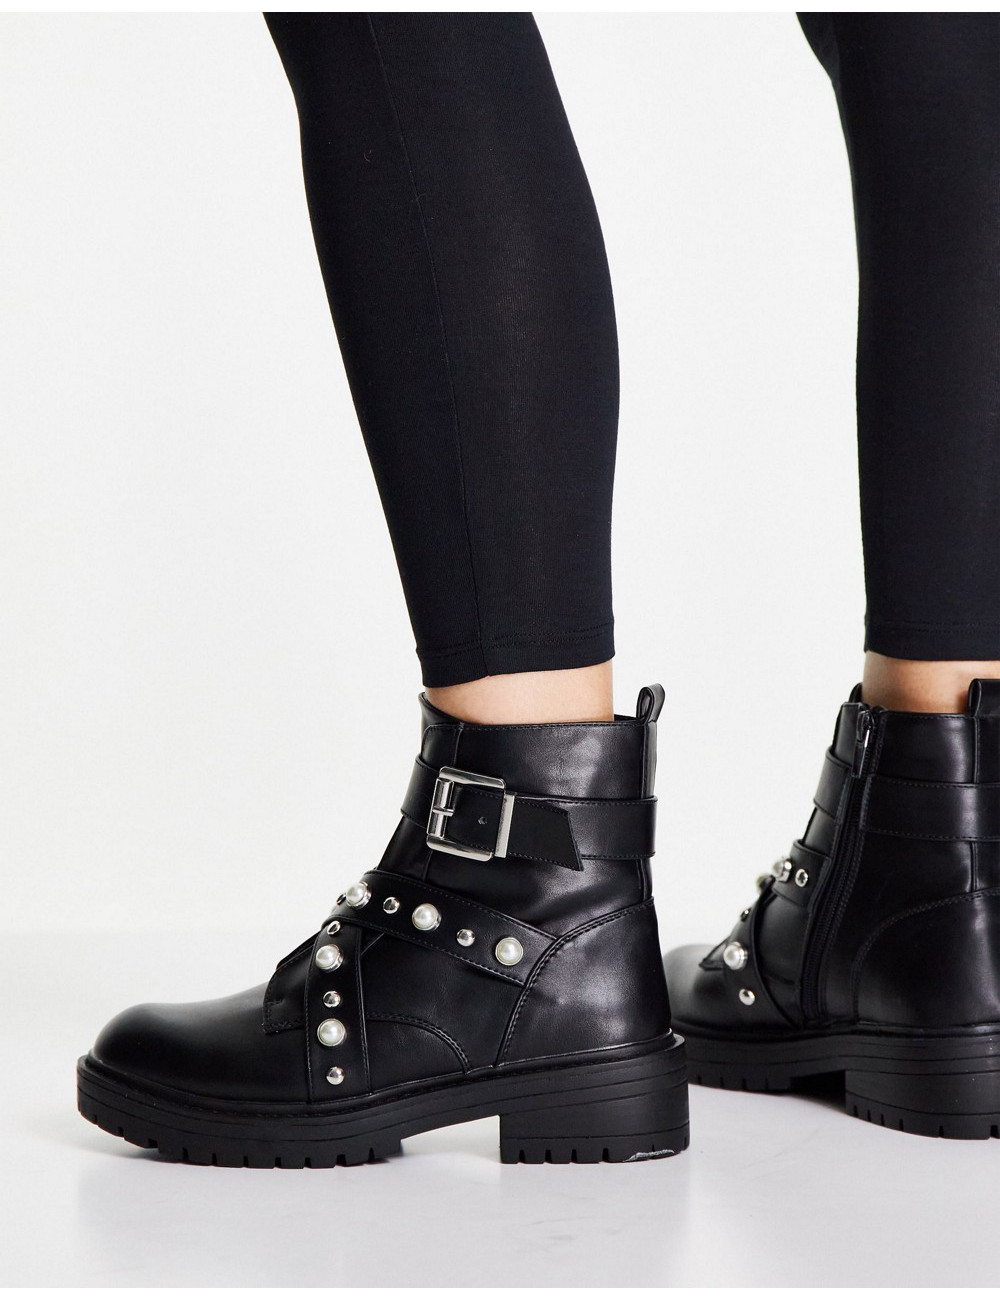 New Look pearl studded boot...